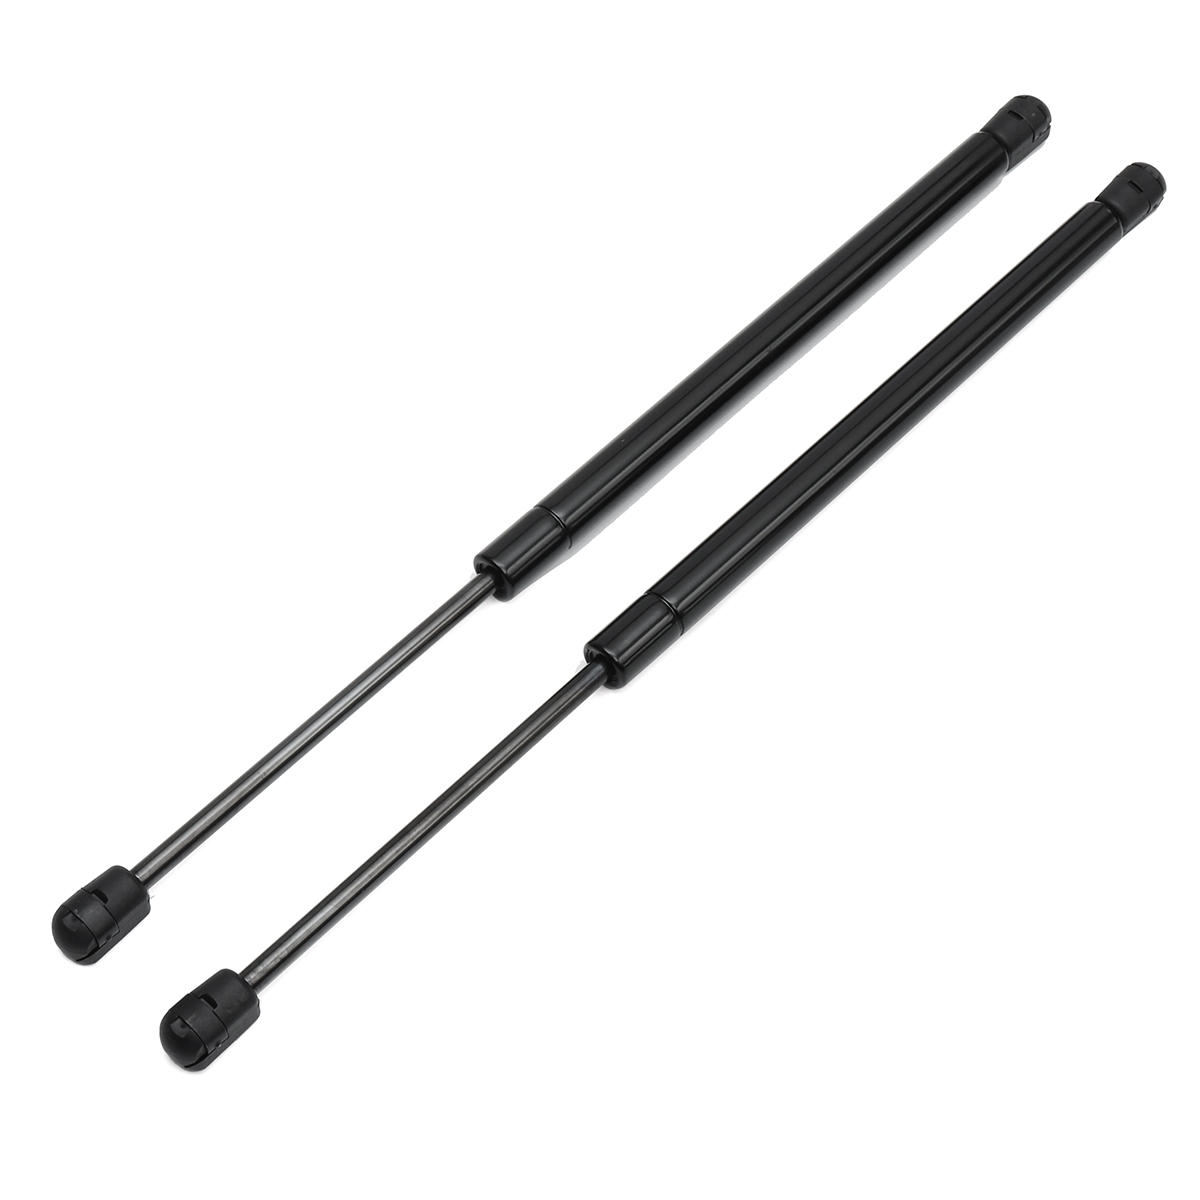 Pair Front Hood Lift Support Damper For Ford Excursion F-250 350 450 550 99-07